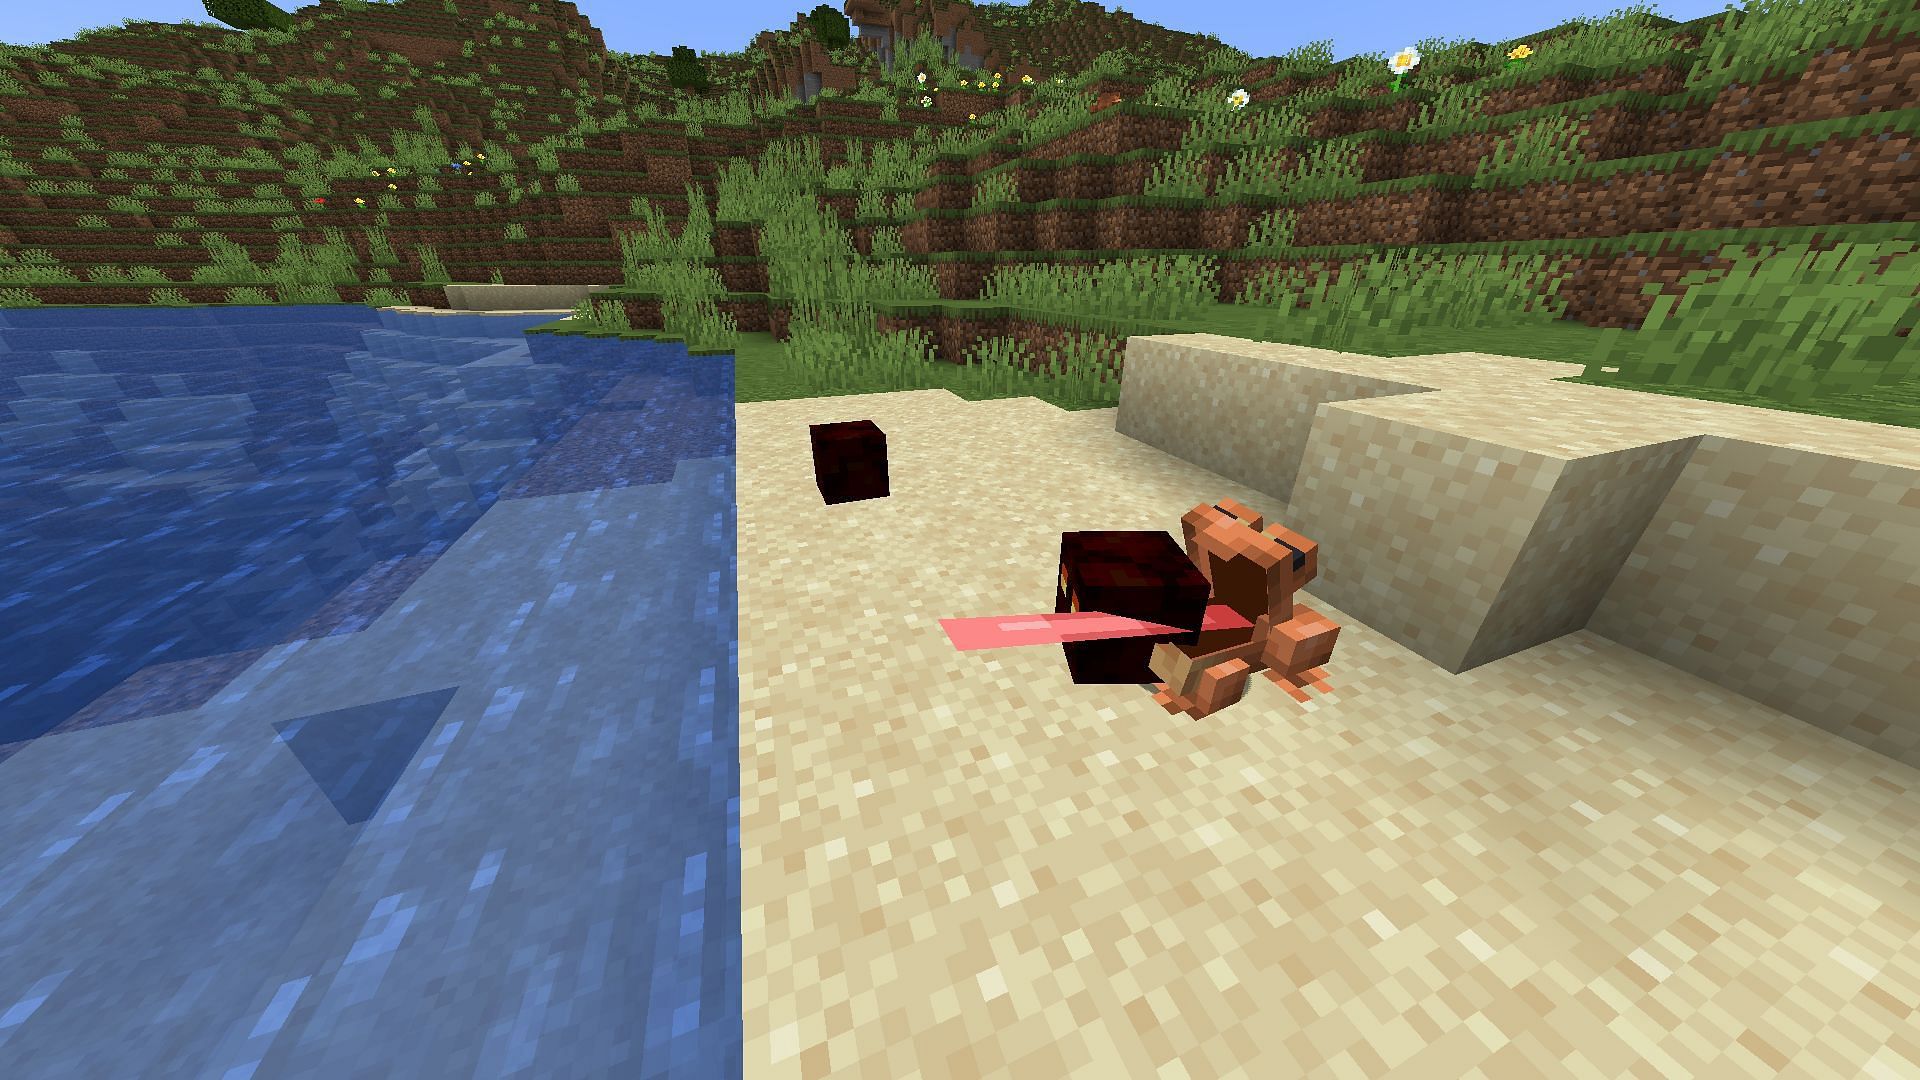 Magma cube being eaten by frog (Image via Minecraft)